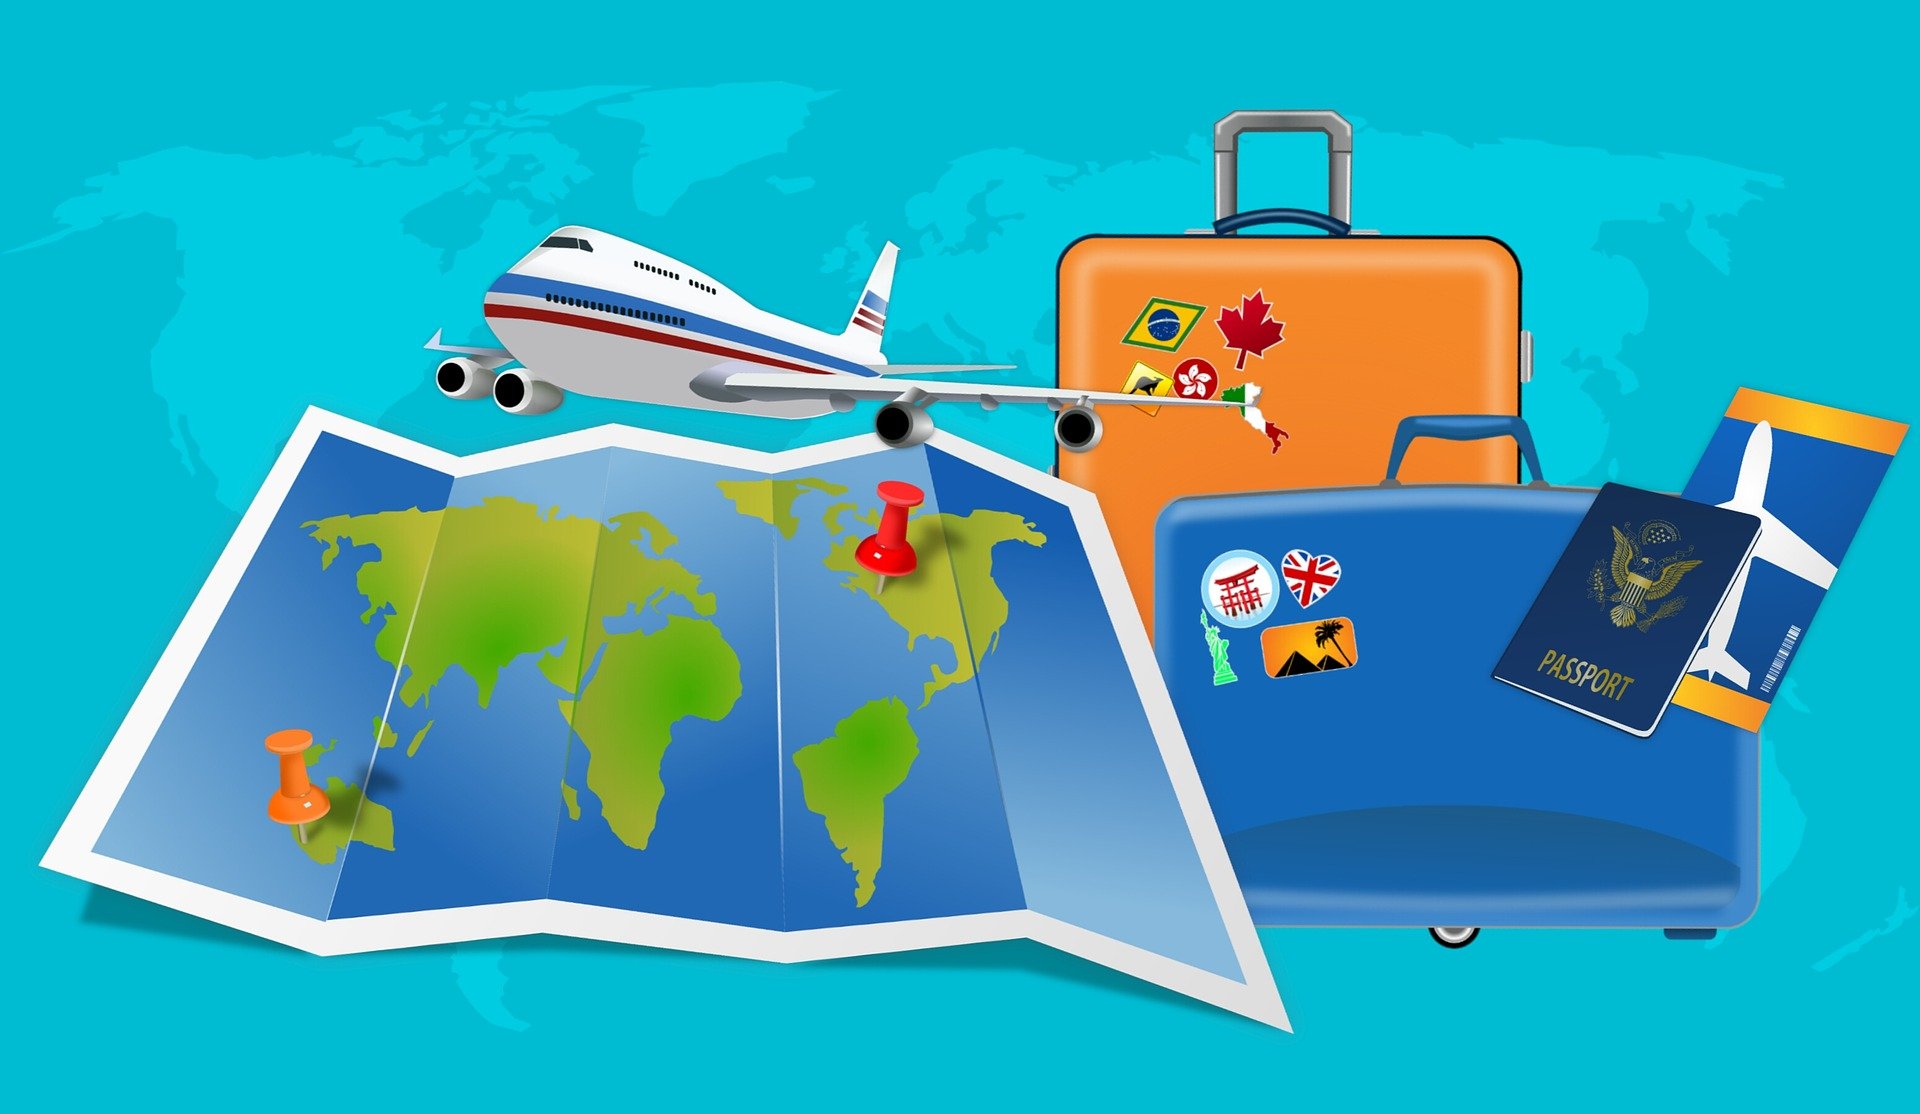 Image of a map, plane, luggage, and passport